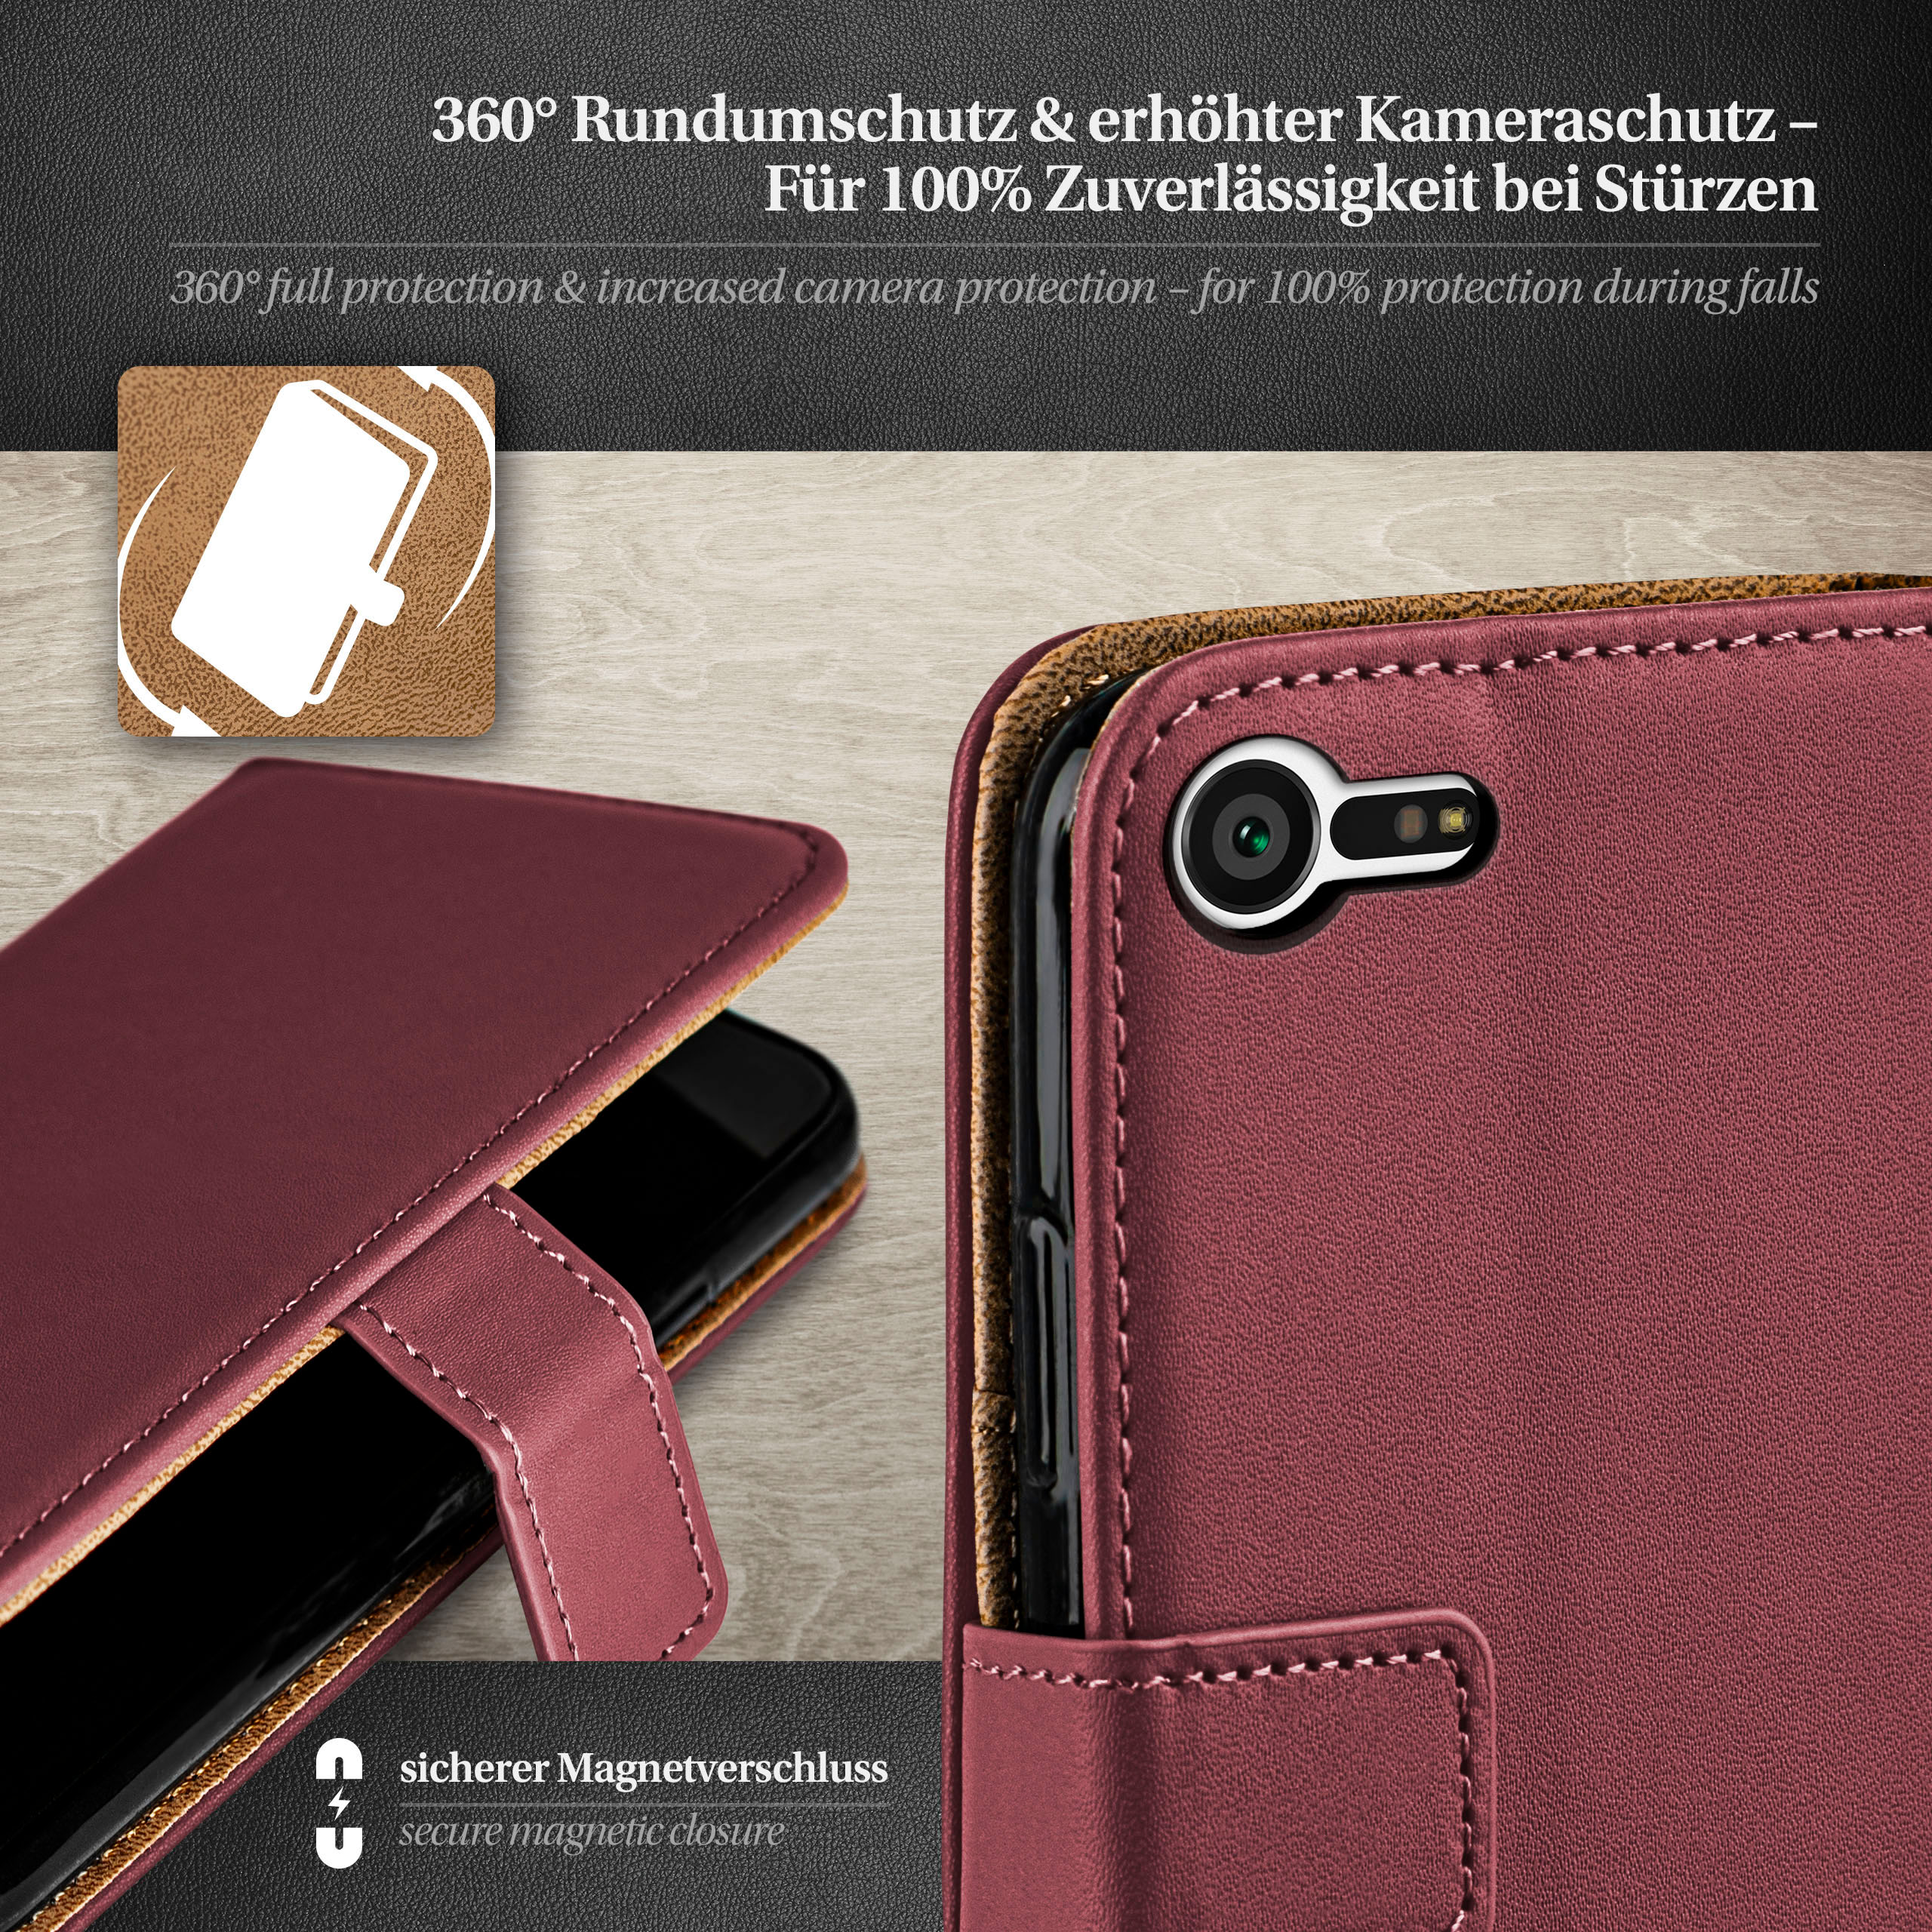 Book Compact, MOEX Bookcover, Sony, X Maroon-Red Xperia Case,